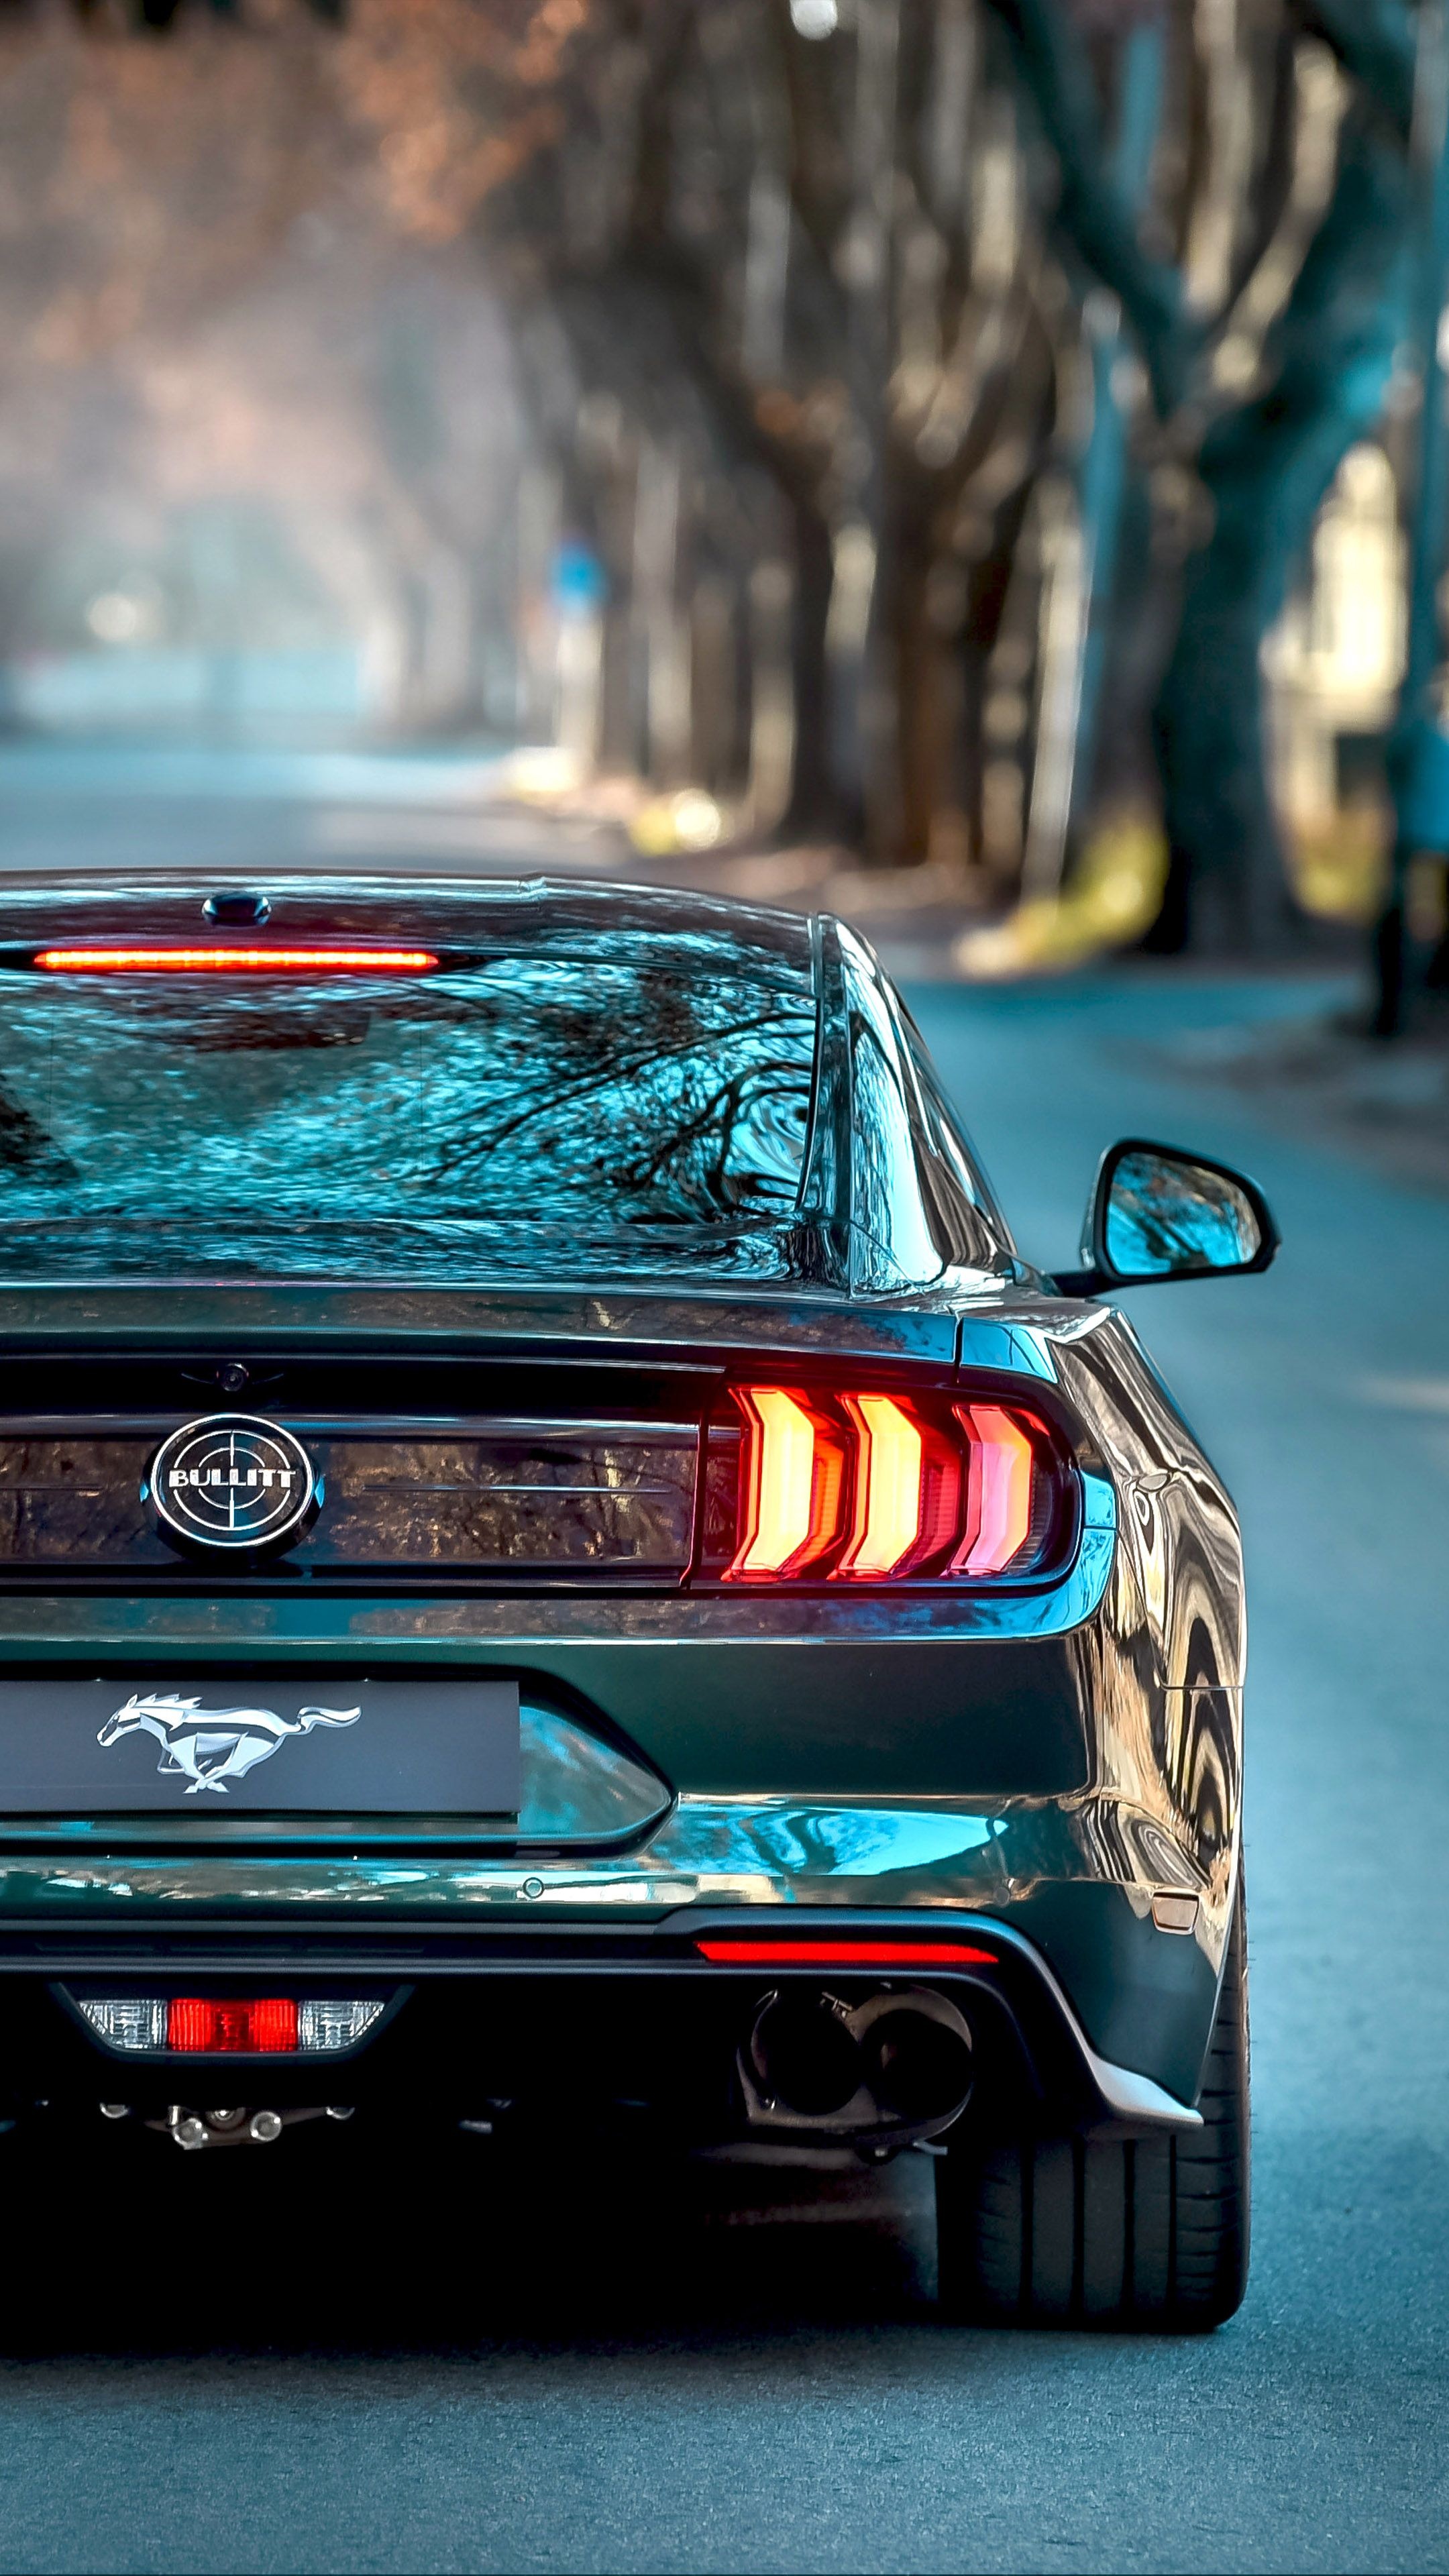 Ford Mustang: One of America's most popular sport coupes, 2019 GT model. 2160x3840 4K Background.